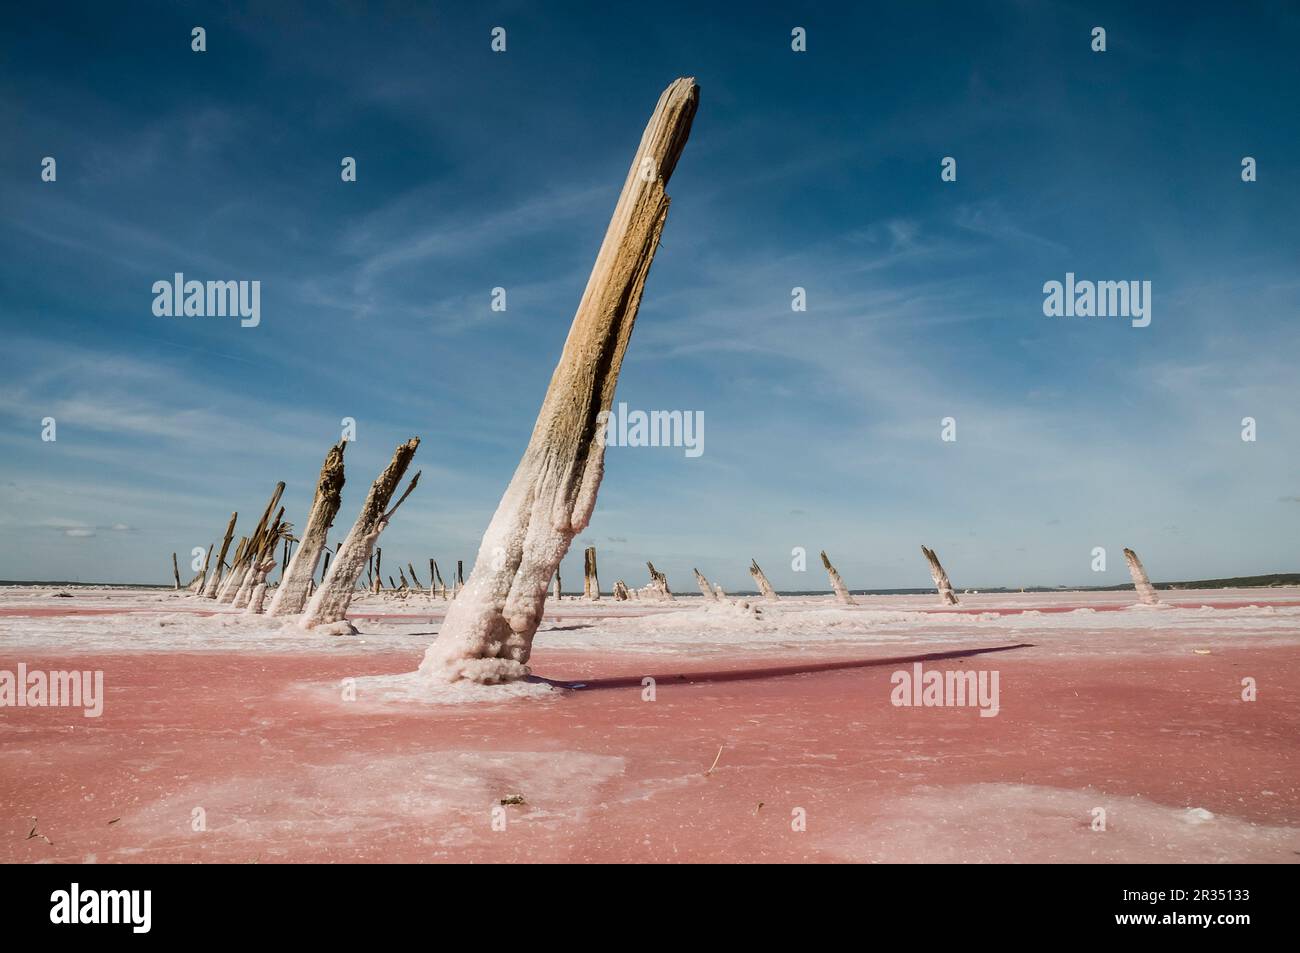 Historical remain in Pampas Saline, La Pampa Province, Patagonia, Argentina. Stock Photo